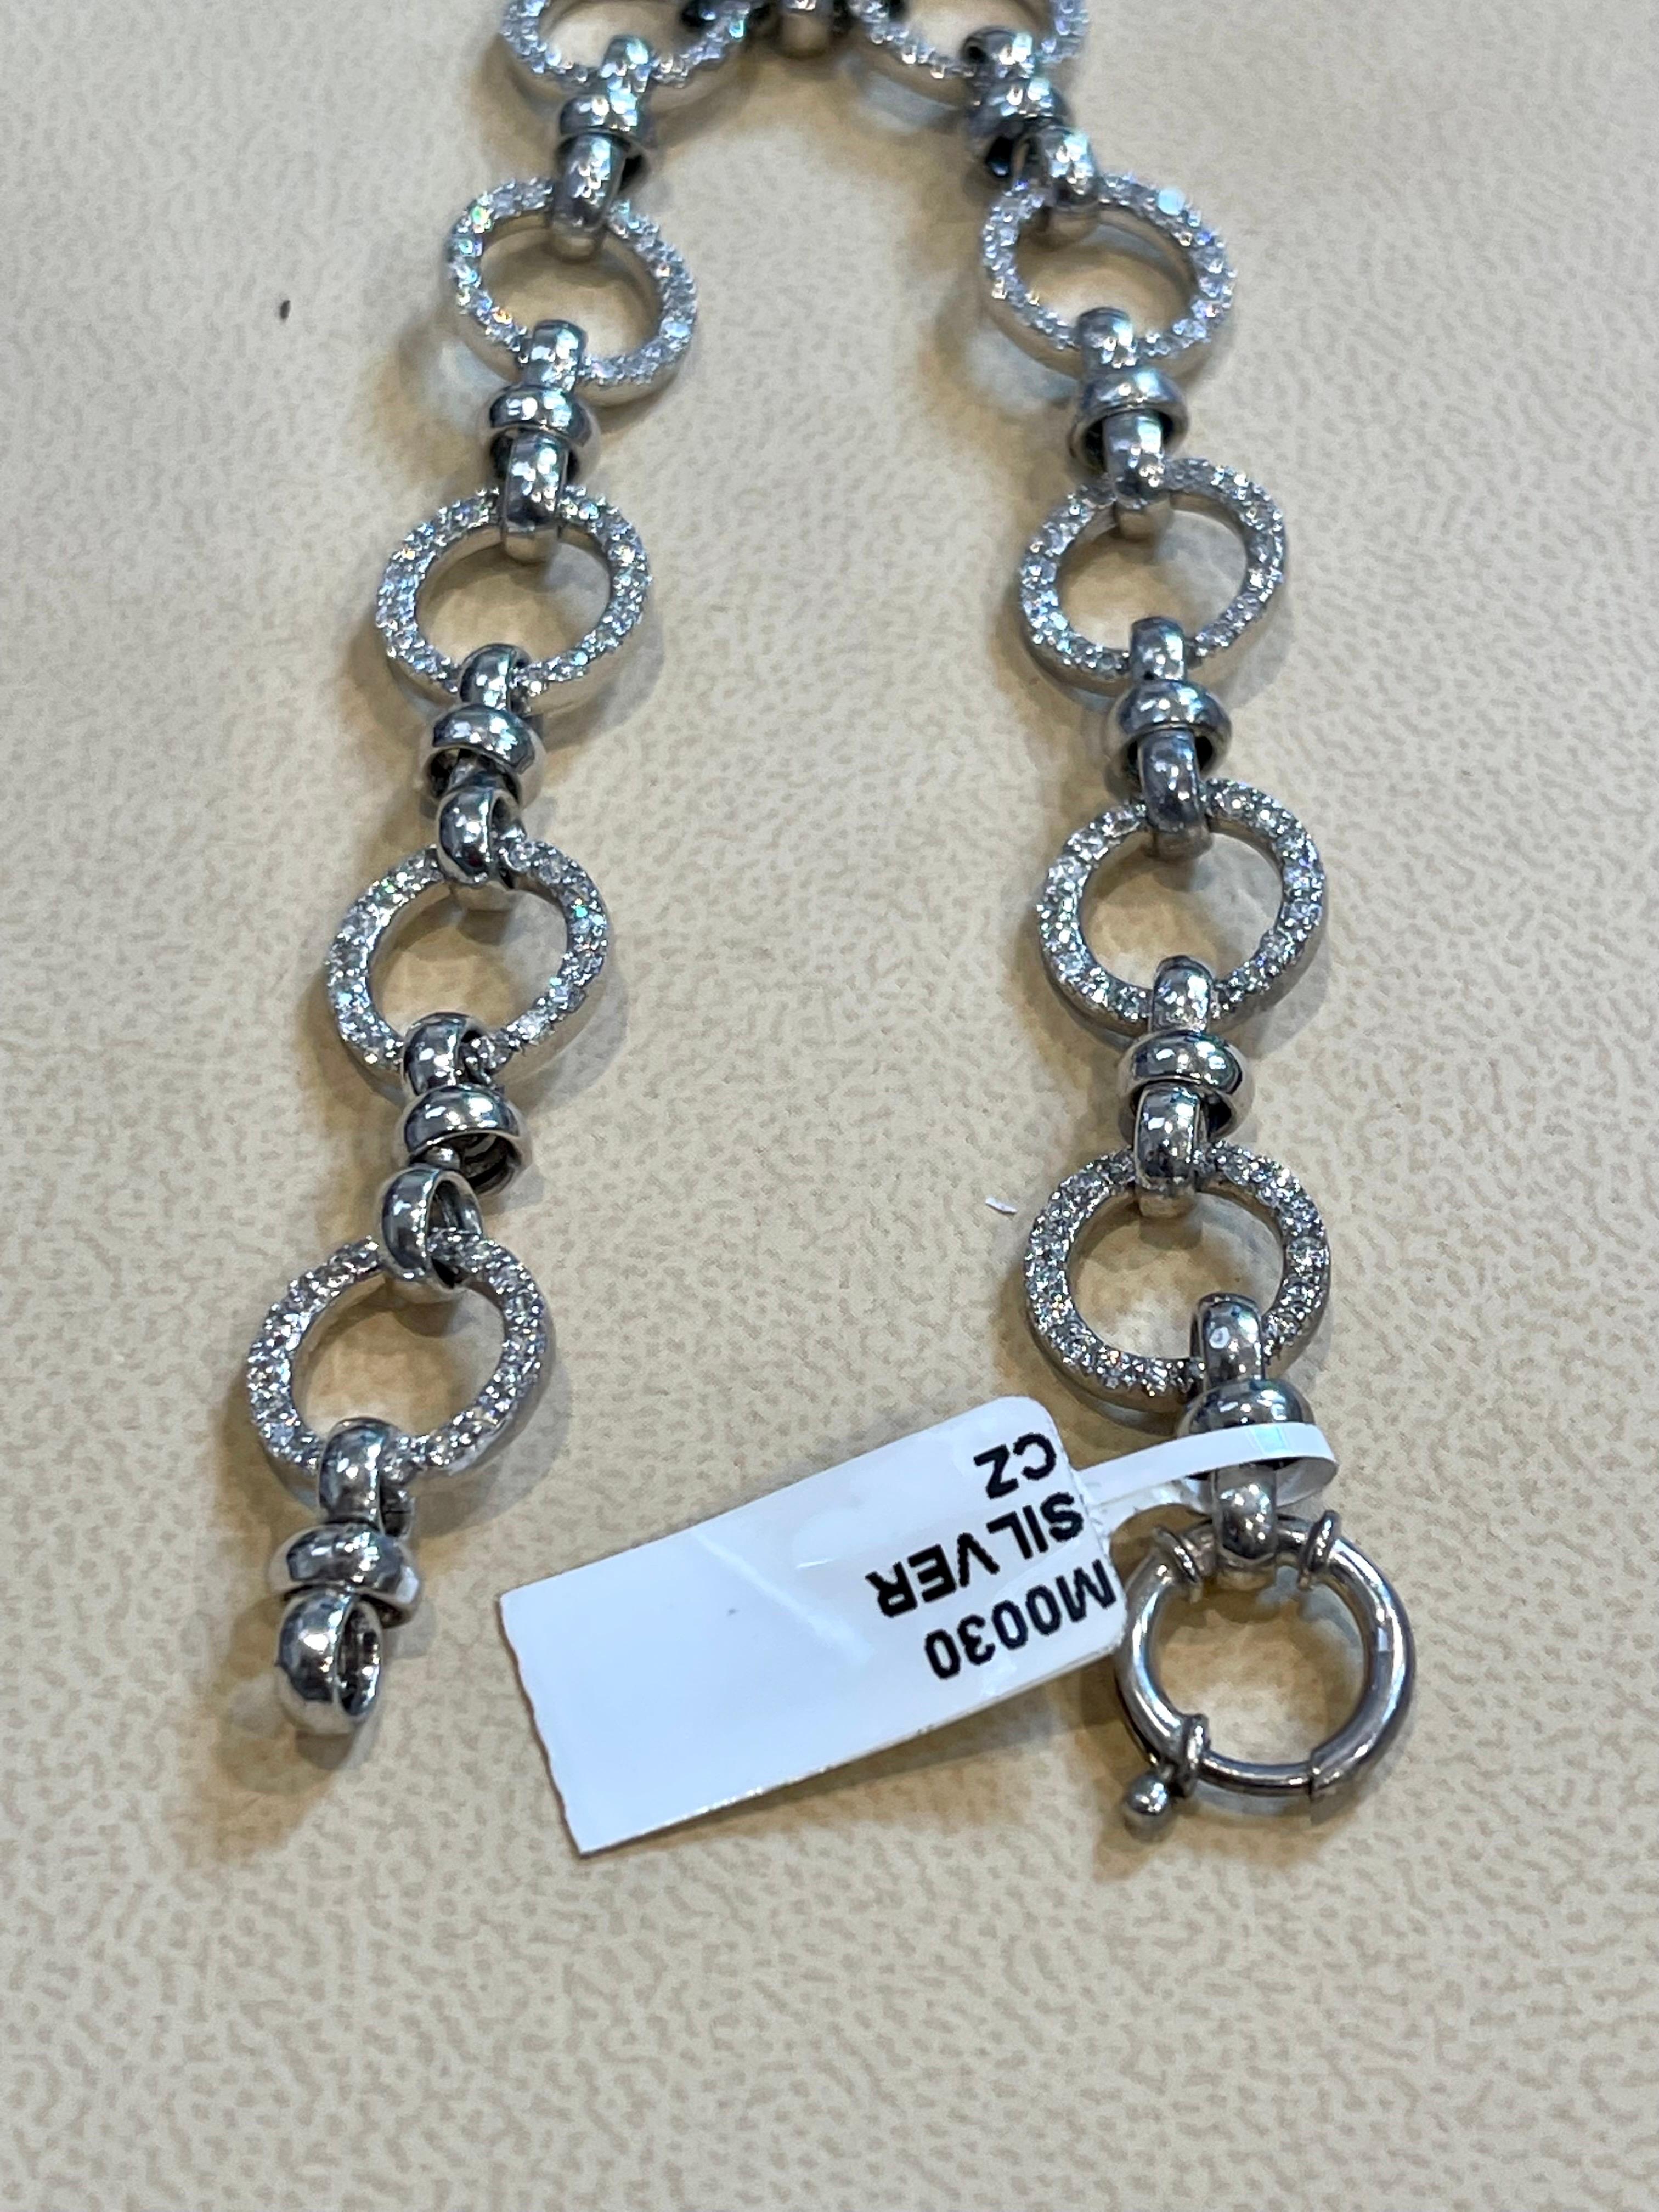  Cubic Zirconia or CZ is the cubic Crystalline form Of Zirconium dioxide. Its Hard and Usually  colorless.
This Bracelet is  amazing . Just looks like diamonds .
Pure sterling silver which will not tarnish over time.
8 inch long

Weight of the